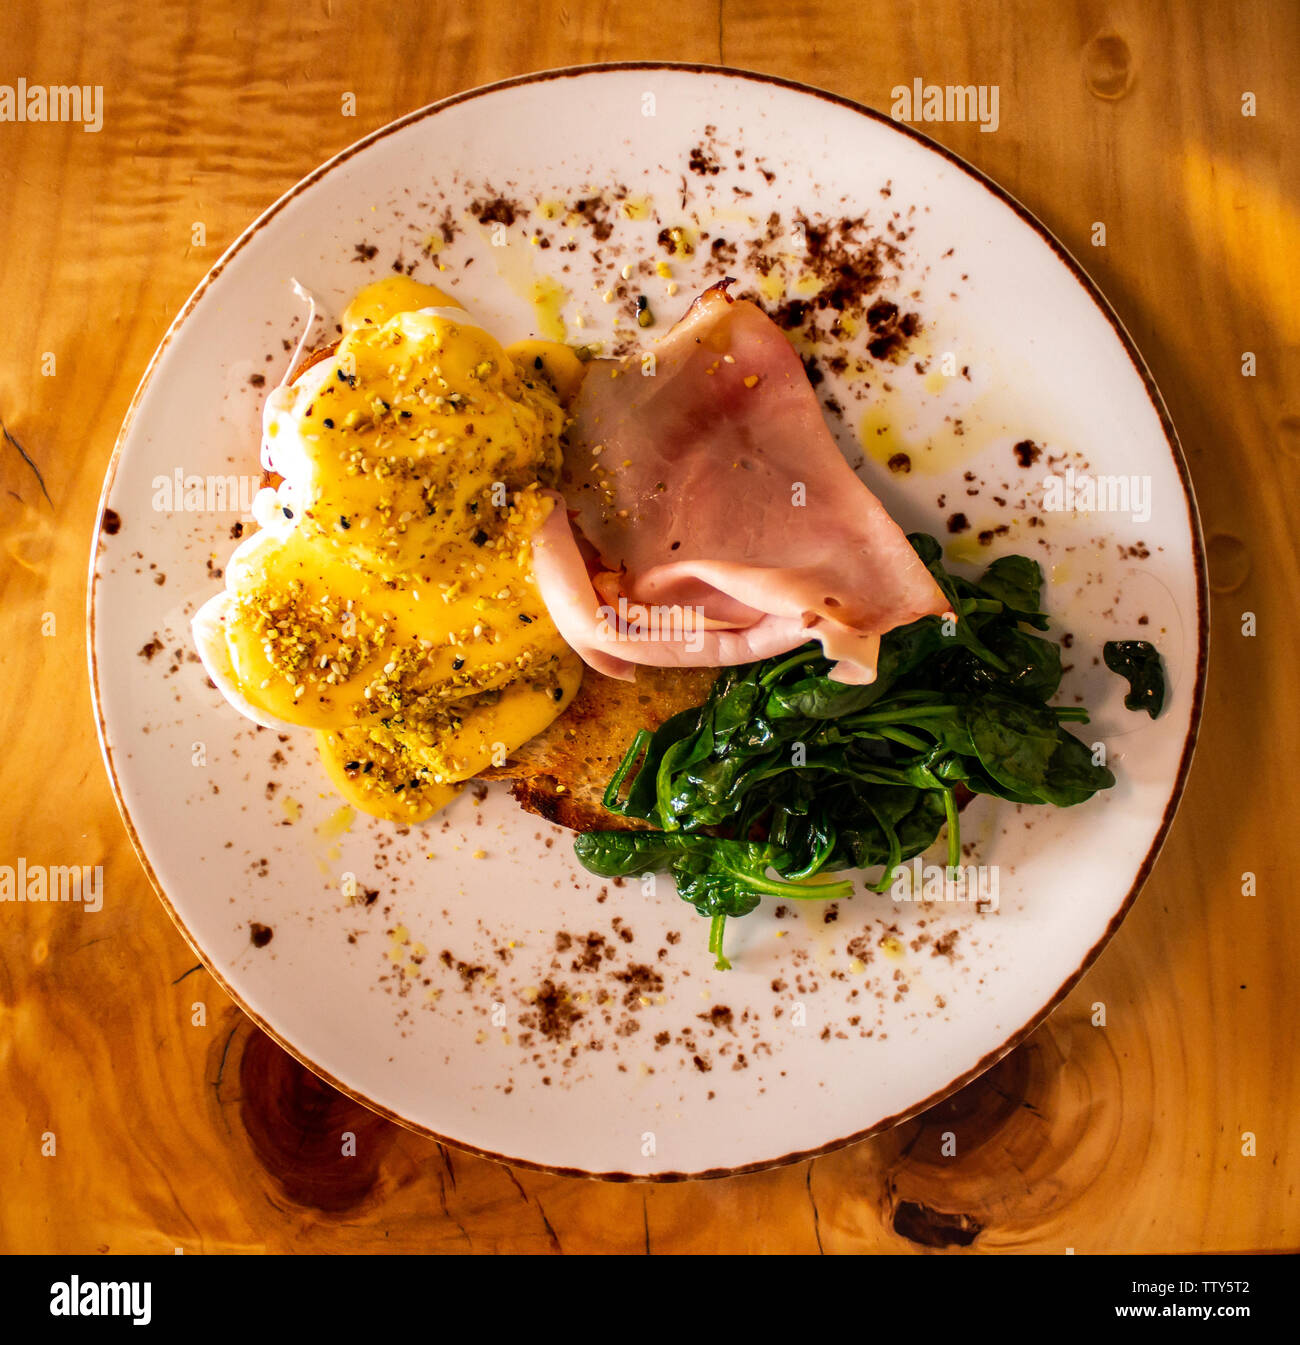 Breakfast meal plate of food comprising eggs Benedict with ham, spinach, toast and garnish set atop wooden table Stock Photo